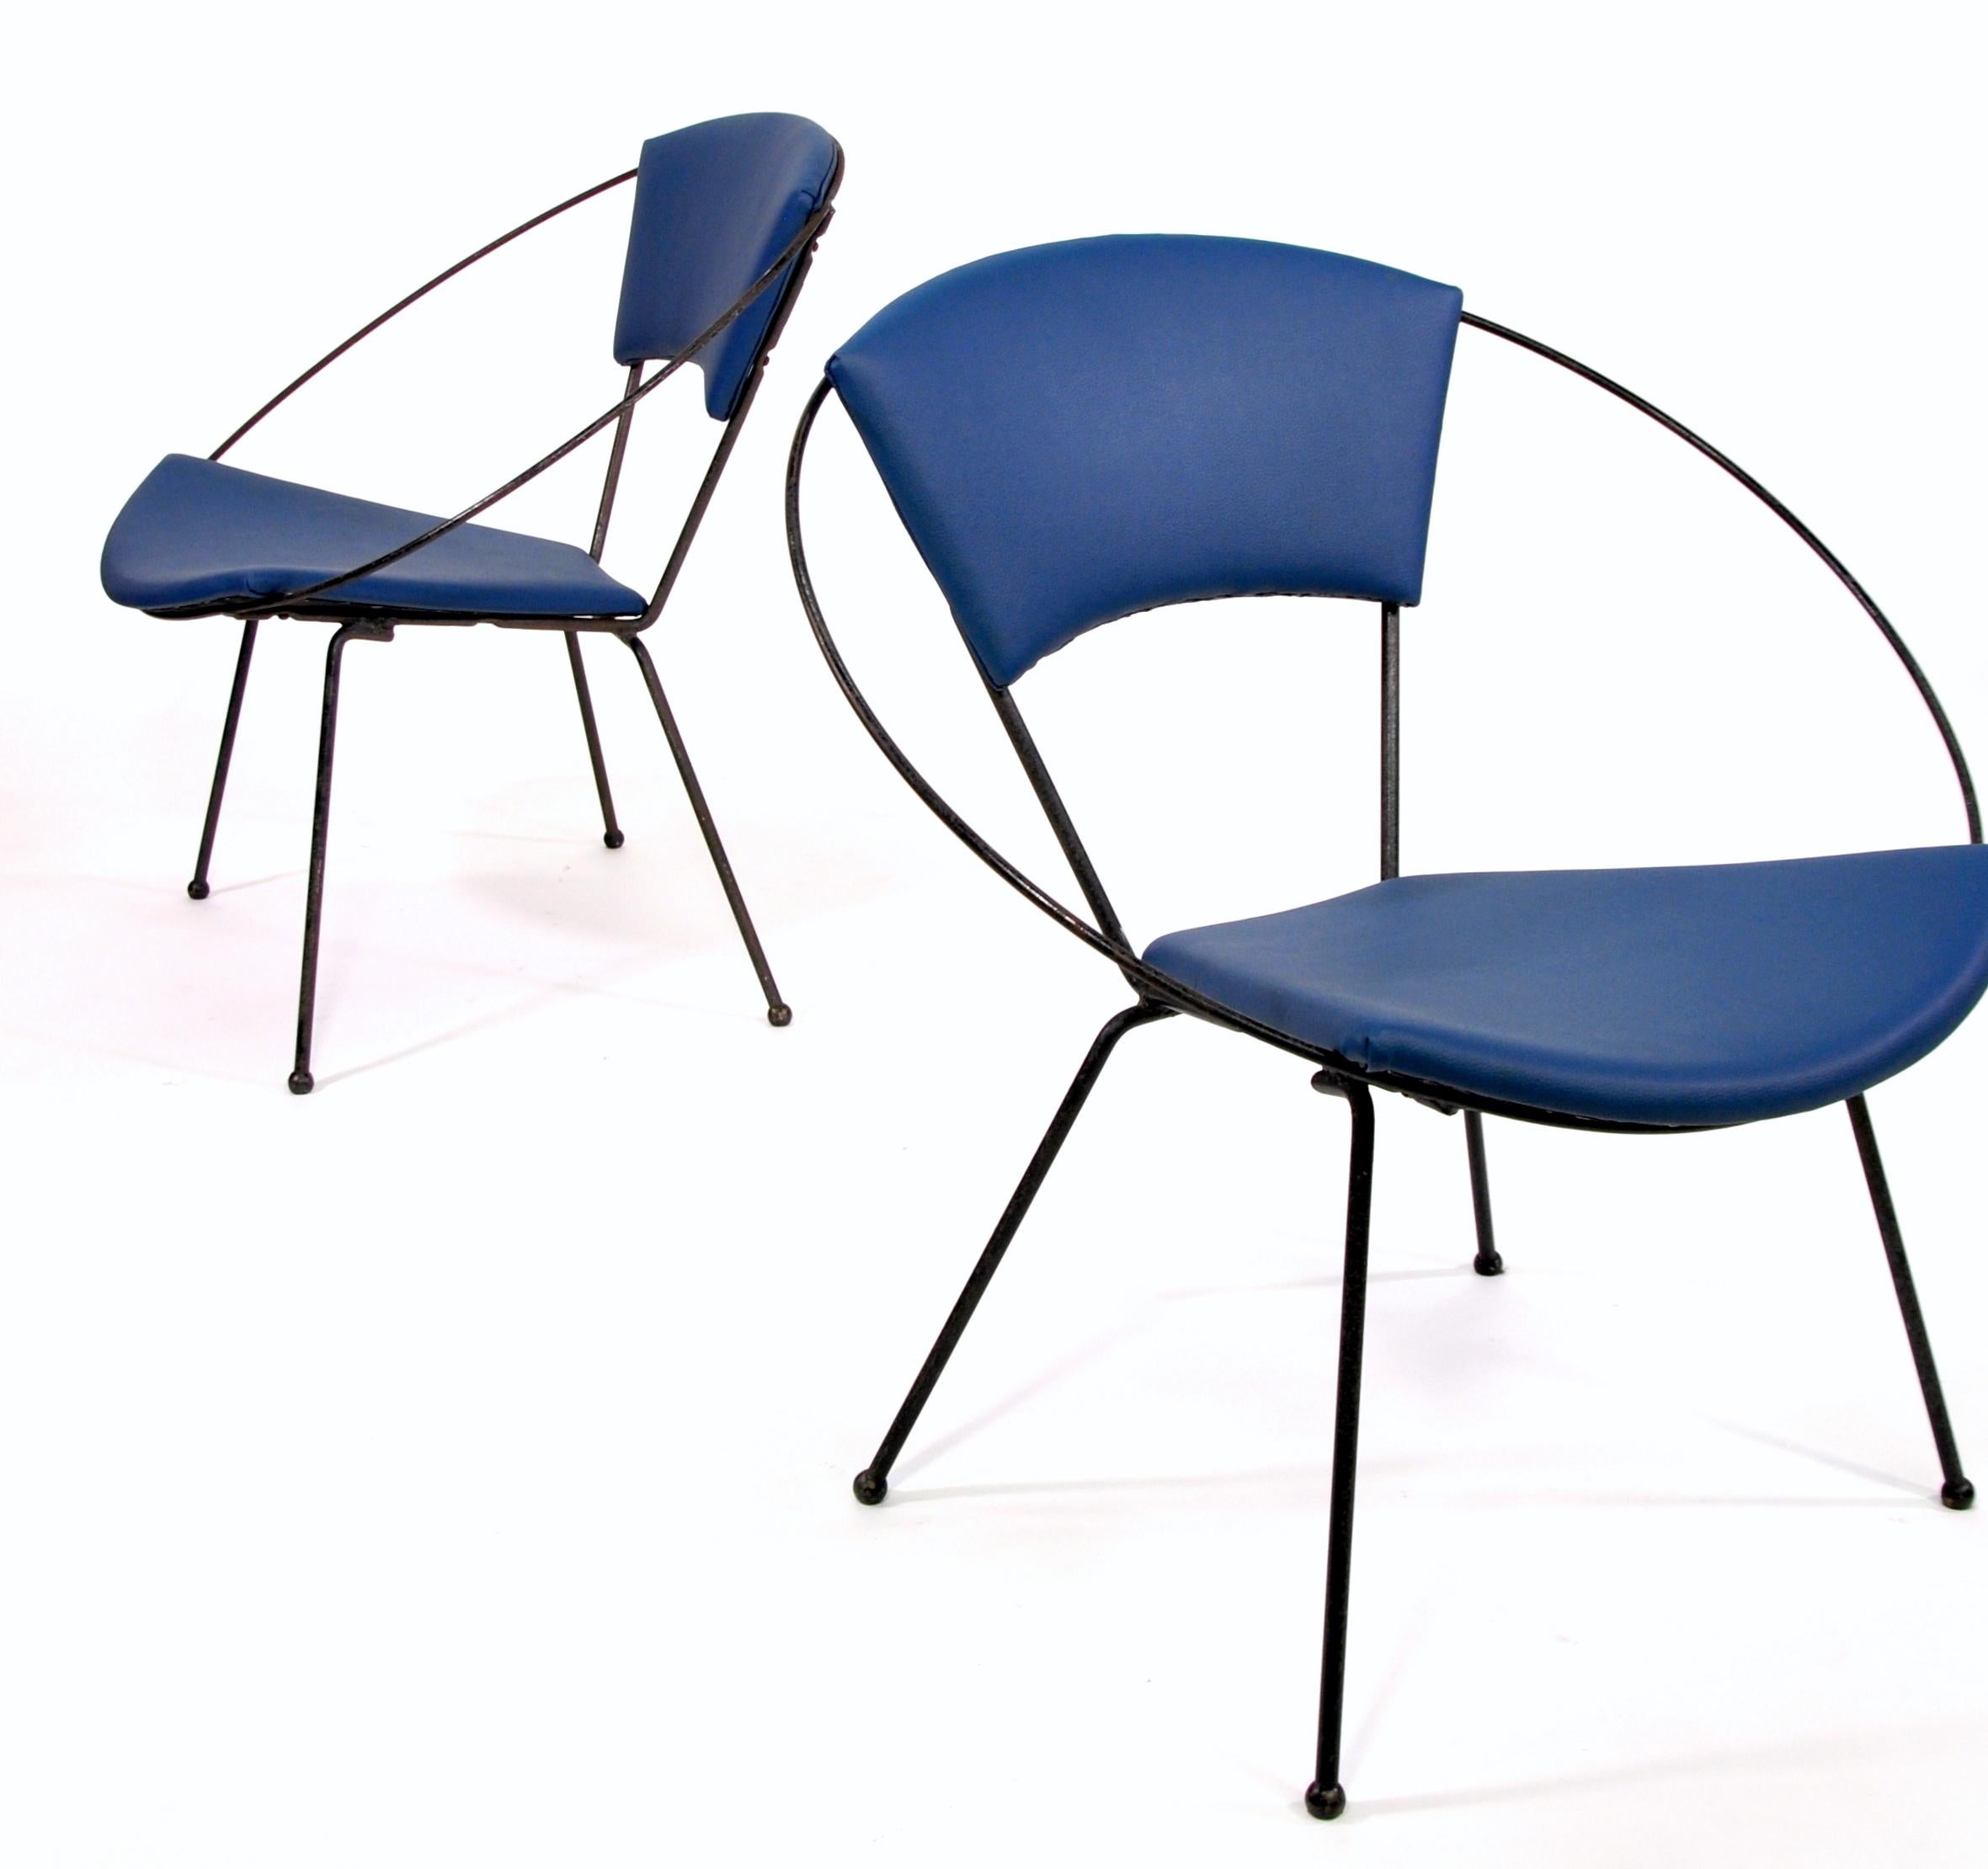 Mid-Century Modern Pair of Mid-Century Black Iron Hoop Chairs by Cicchelli for Reilly-Wolff, 1950s